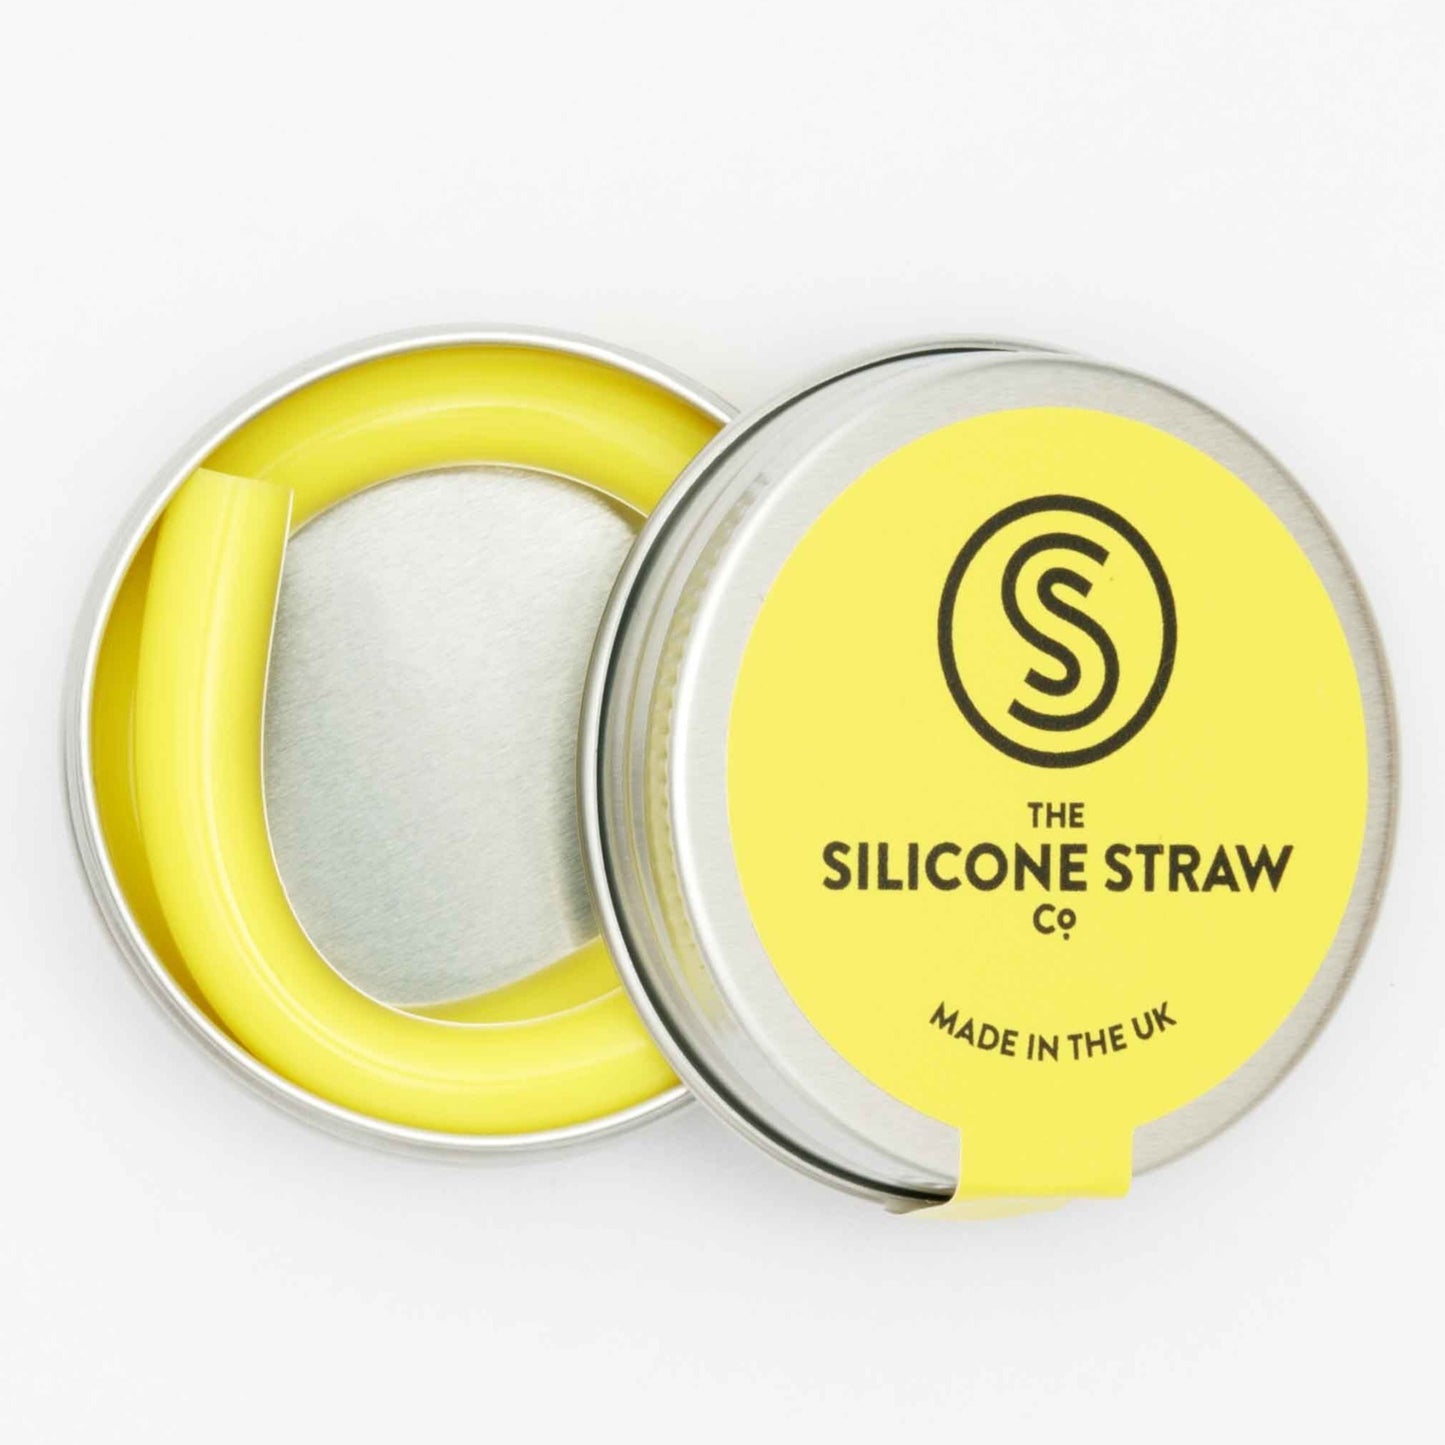 The Silicone Straw Company - Reusable straws in tins